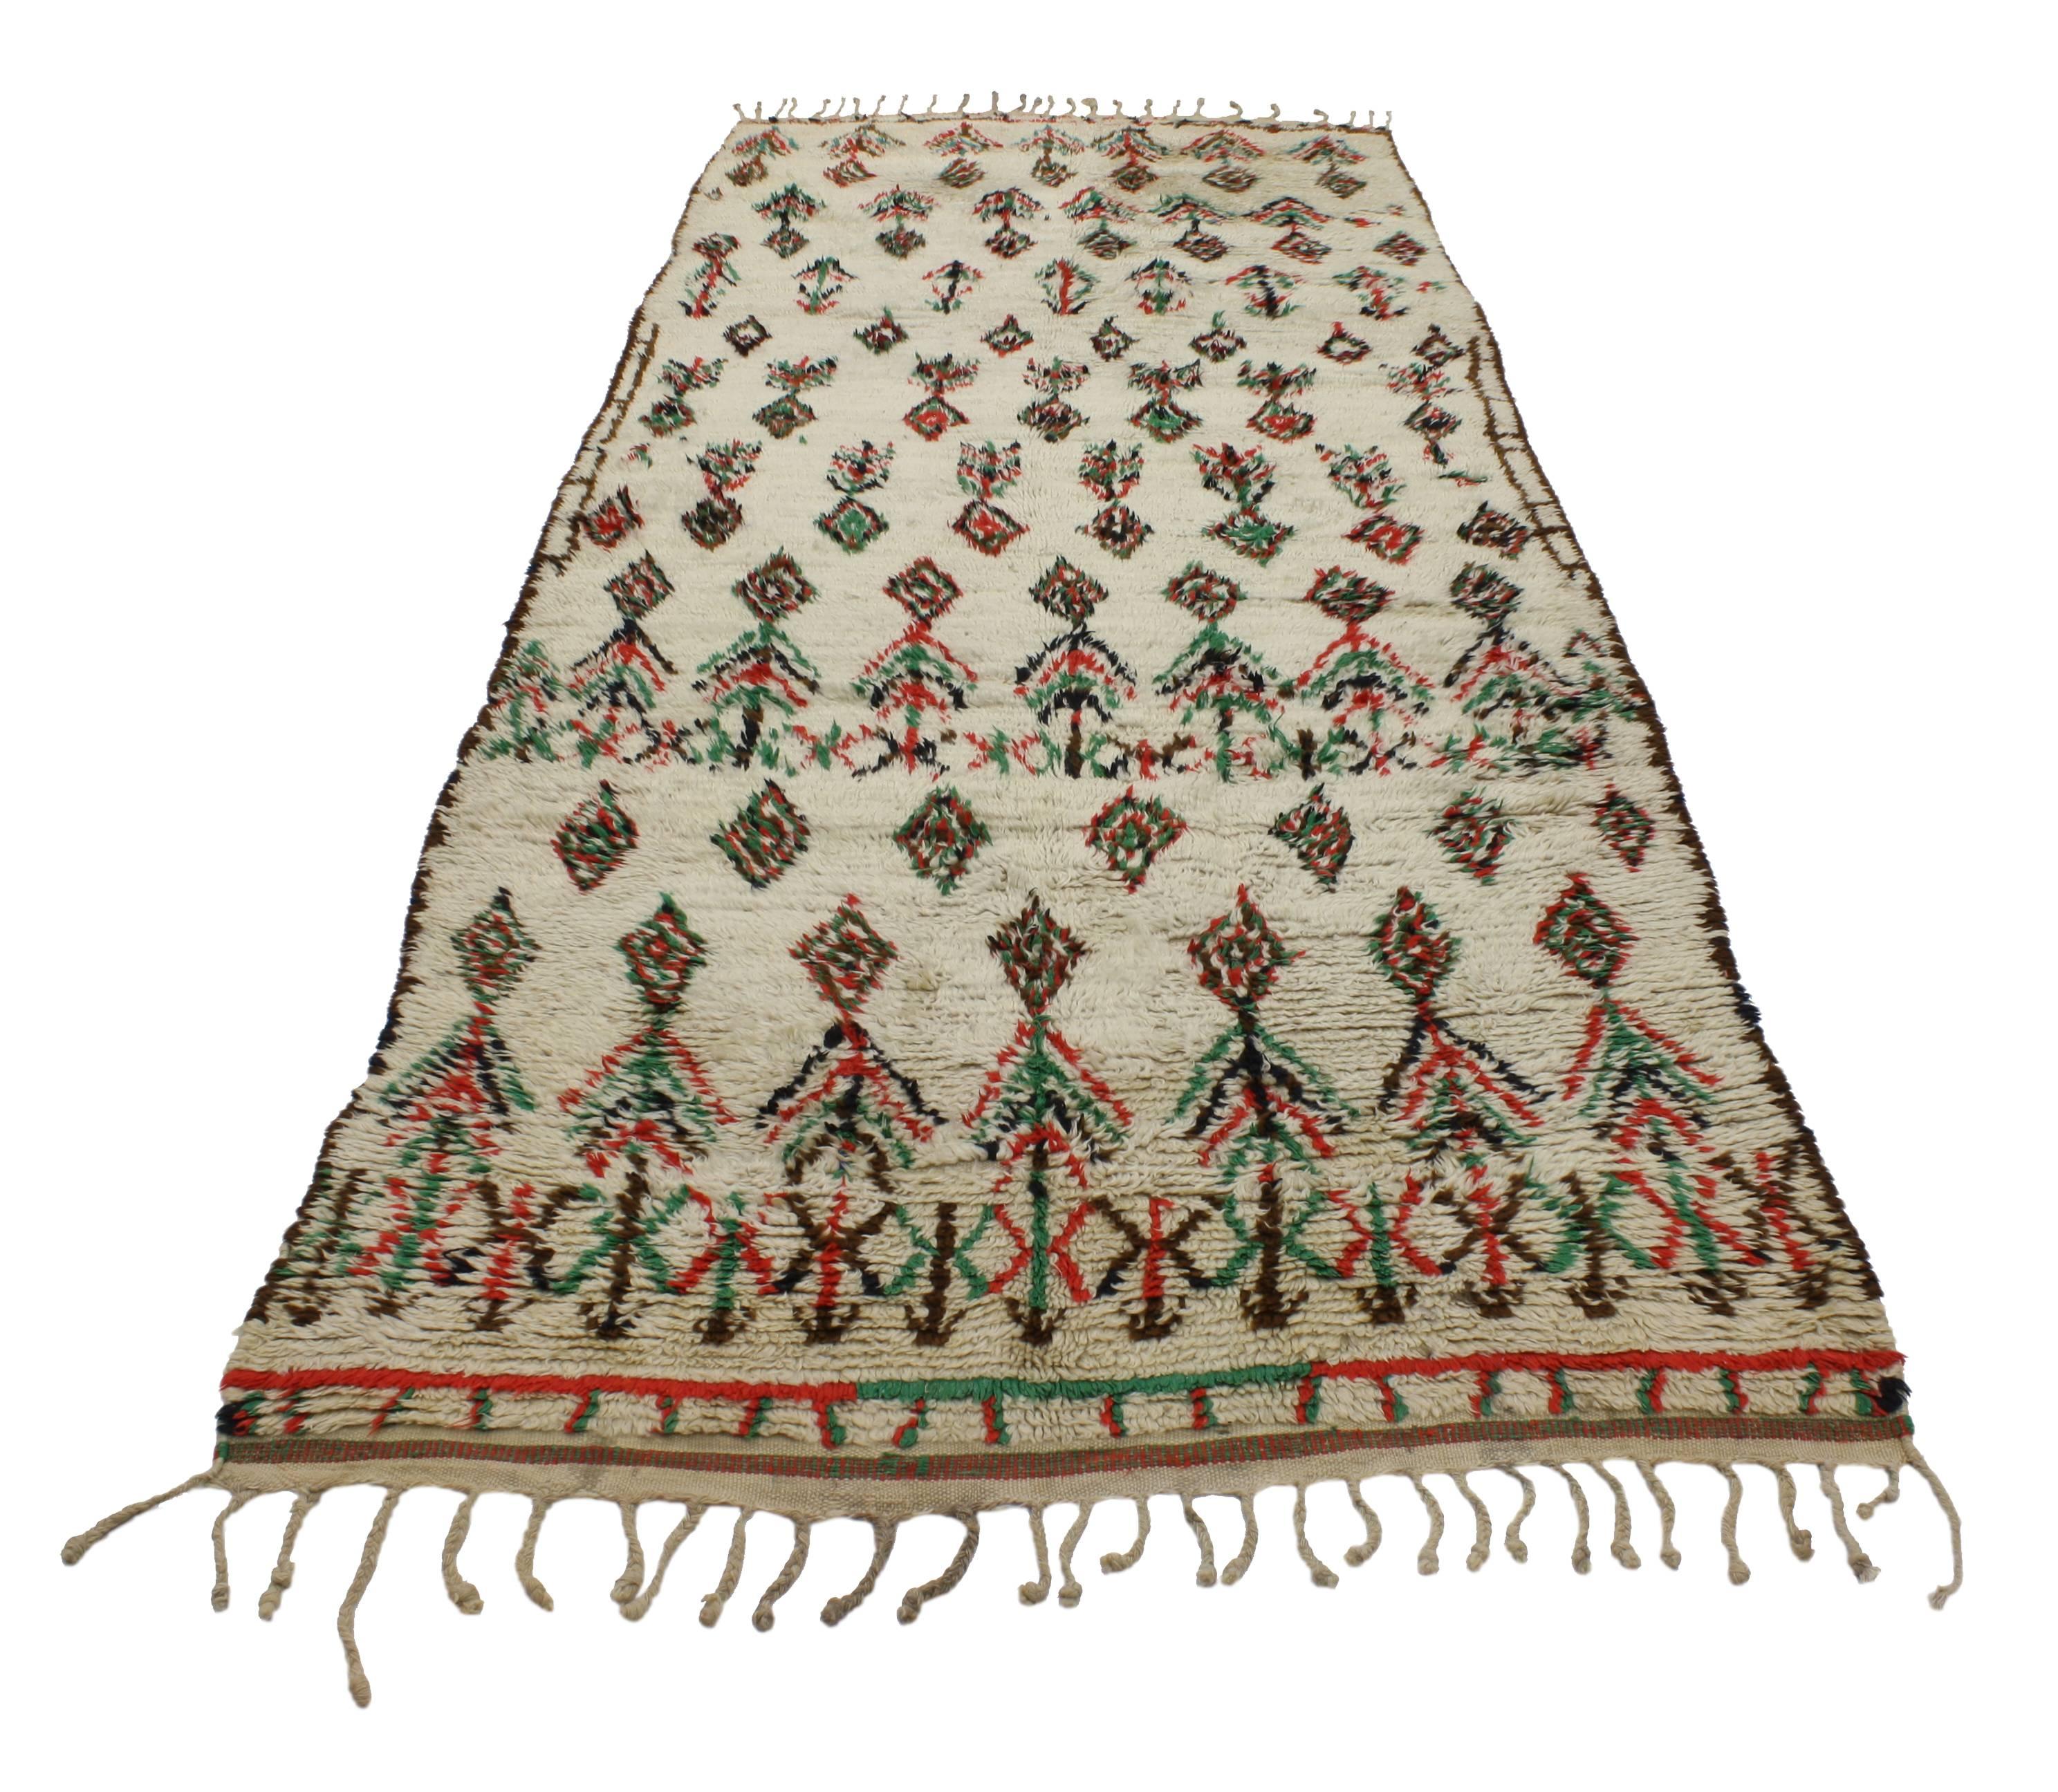 Vintage Berber Moroccan Azilal Rug Runner with Tribal Bohemian Style In Good Condition For Sale In Dallas, TX